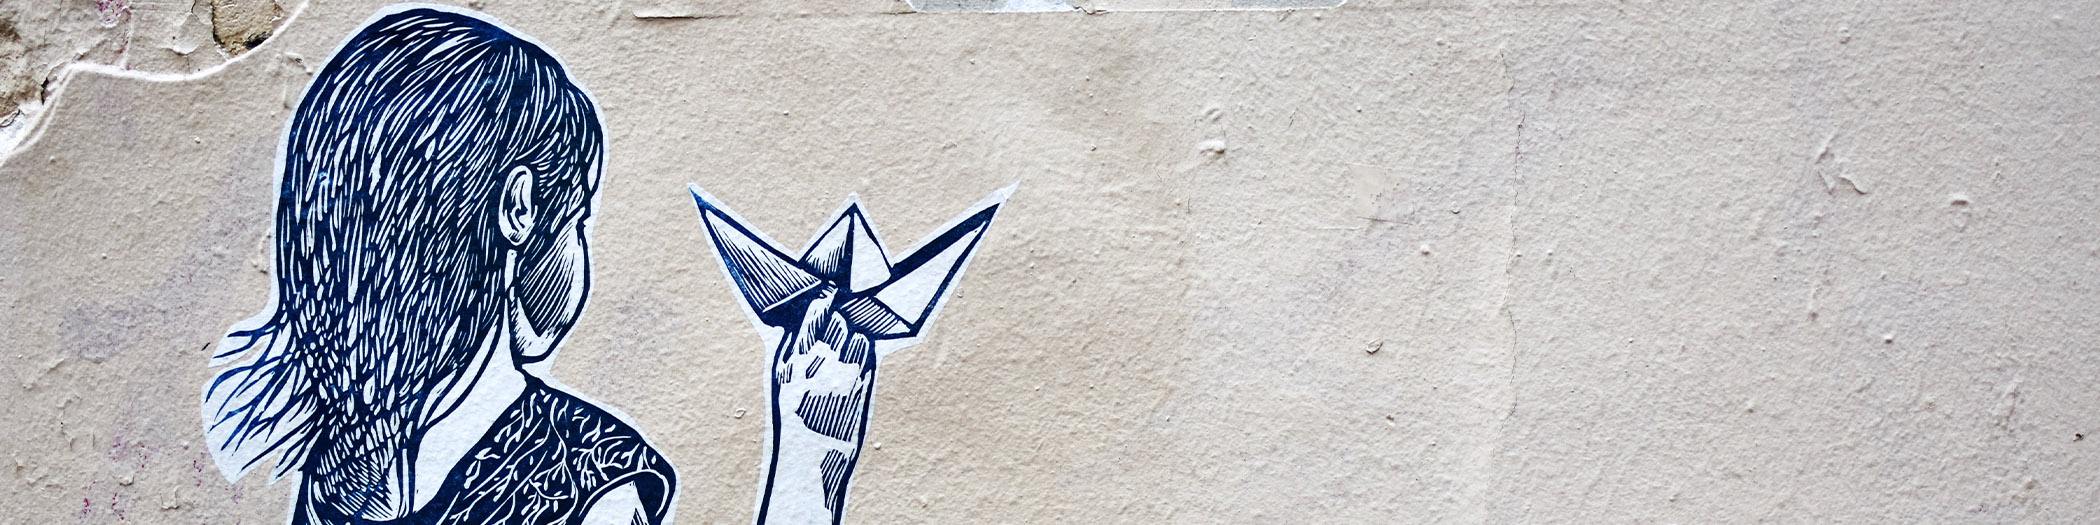 Graffiti of girl with a paper boat